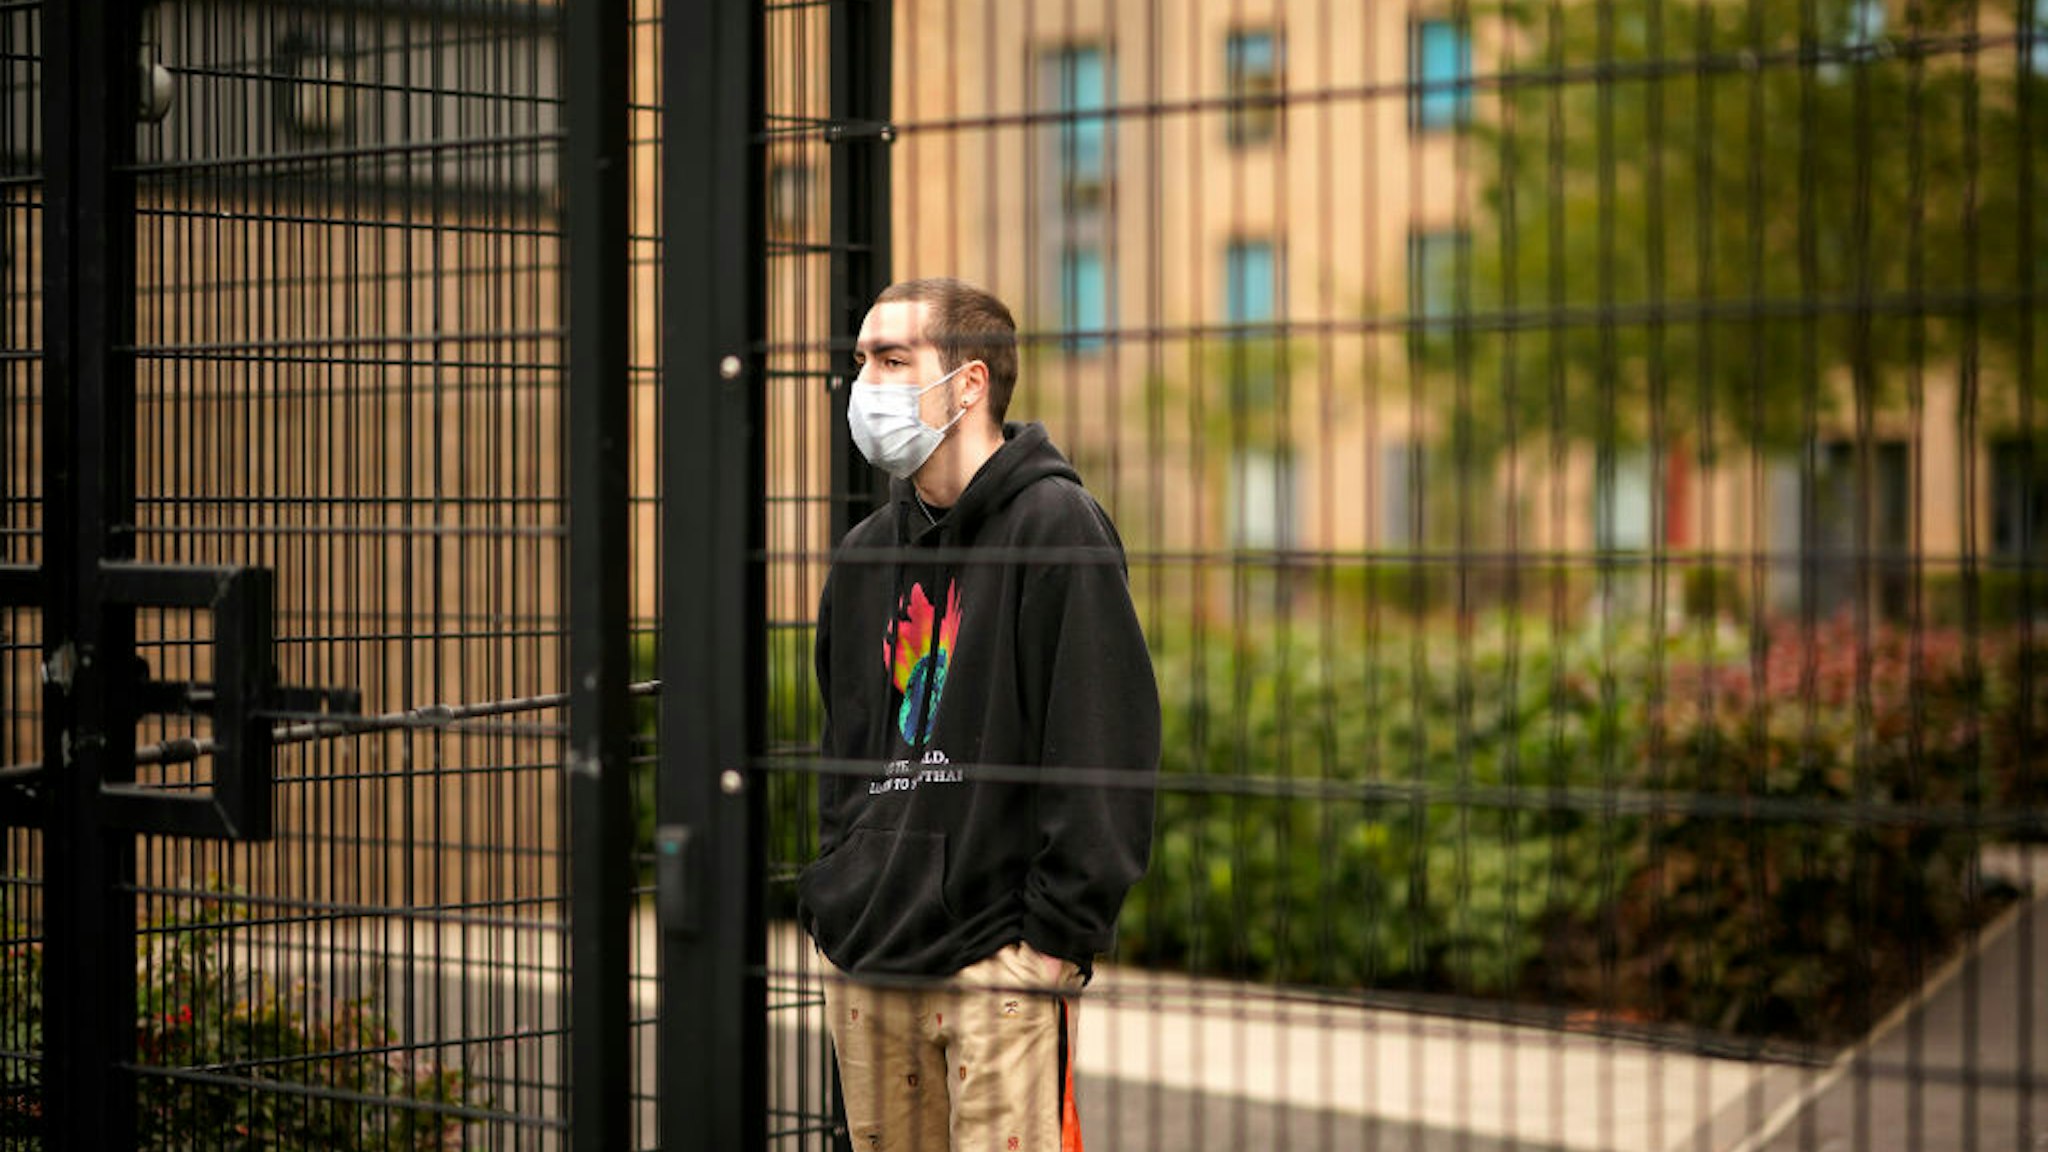 MANCHESTER, ENGLAND - SEPTEMBER 28: Students who are self-isolating stand behind the security fencing of theoir accommodation as they are interviewed by a television crew on September 28, 2020 in Manchester, England. Around 1,700 students across two student housing blocks were told to self-isolate after more than 100 students recently tested positive for Covid-19. The students were told to self-isolate for 14 days even if they were not experiencing symptoms. (Photo by Christopher Furlong/Getty Images)